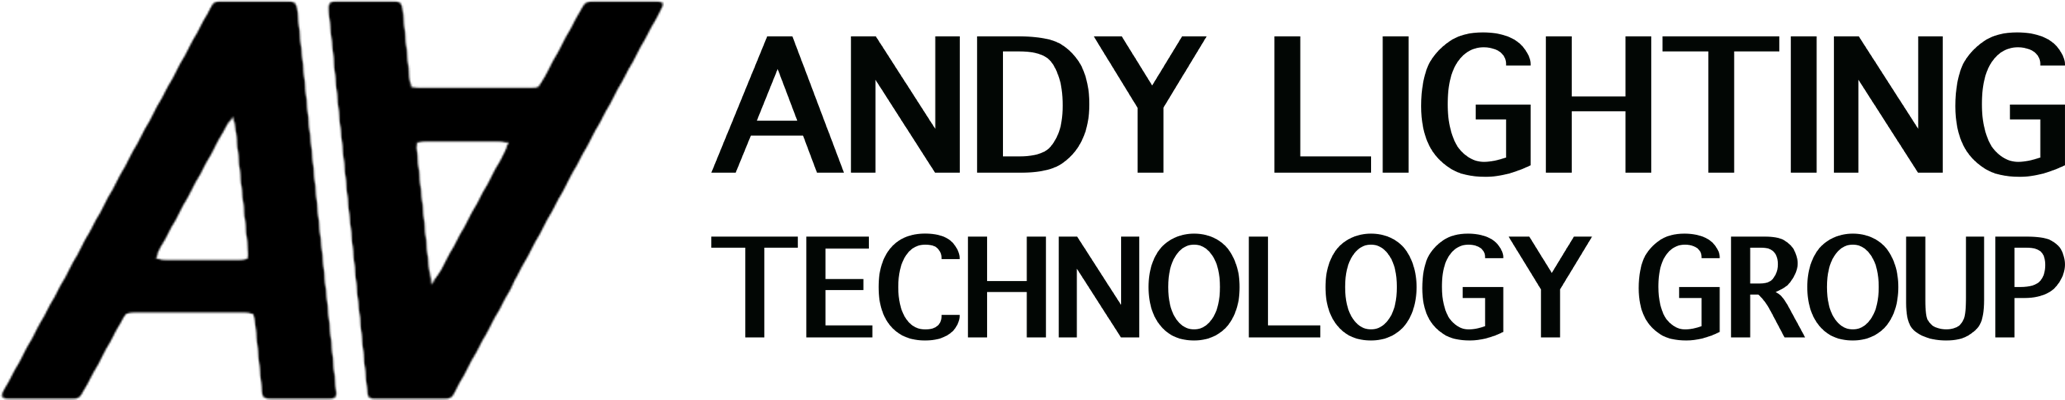 Andy Lighting Technology Group